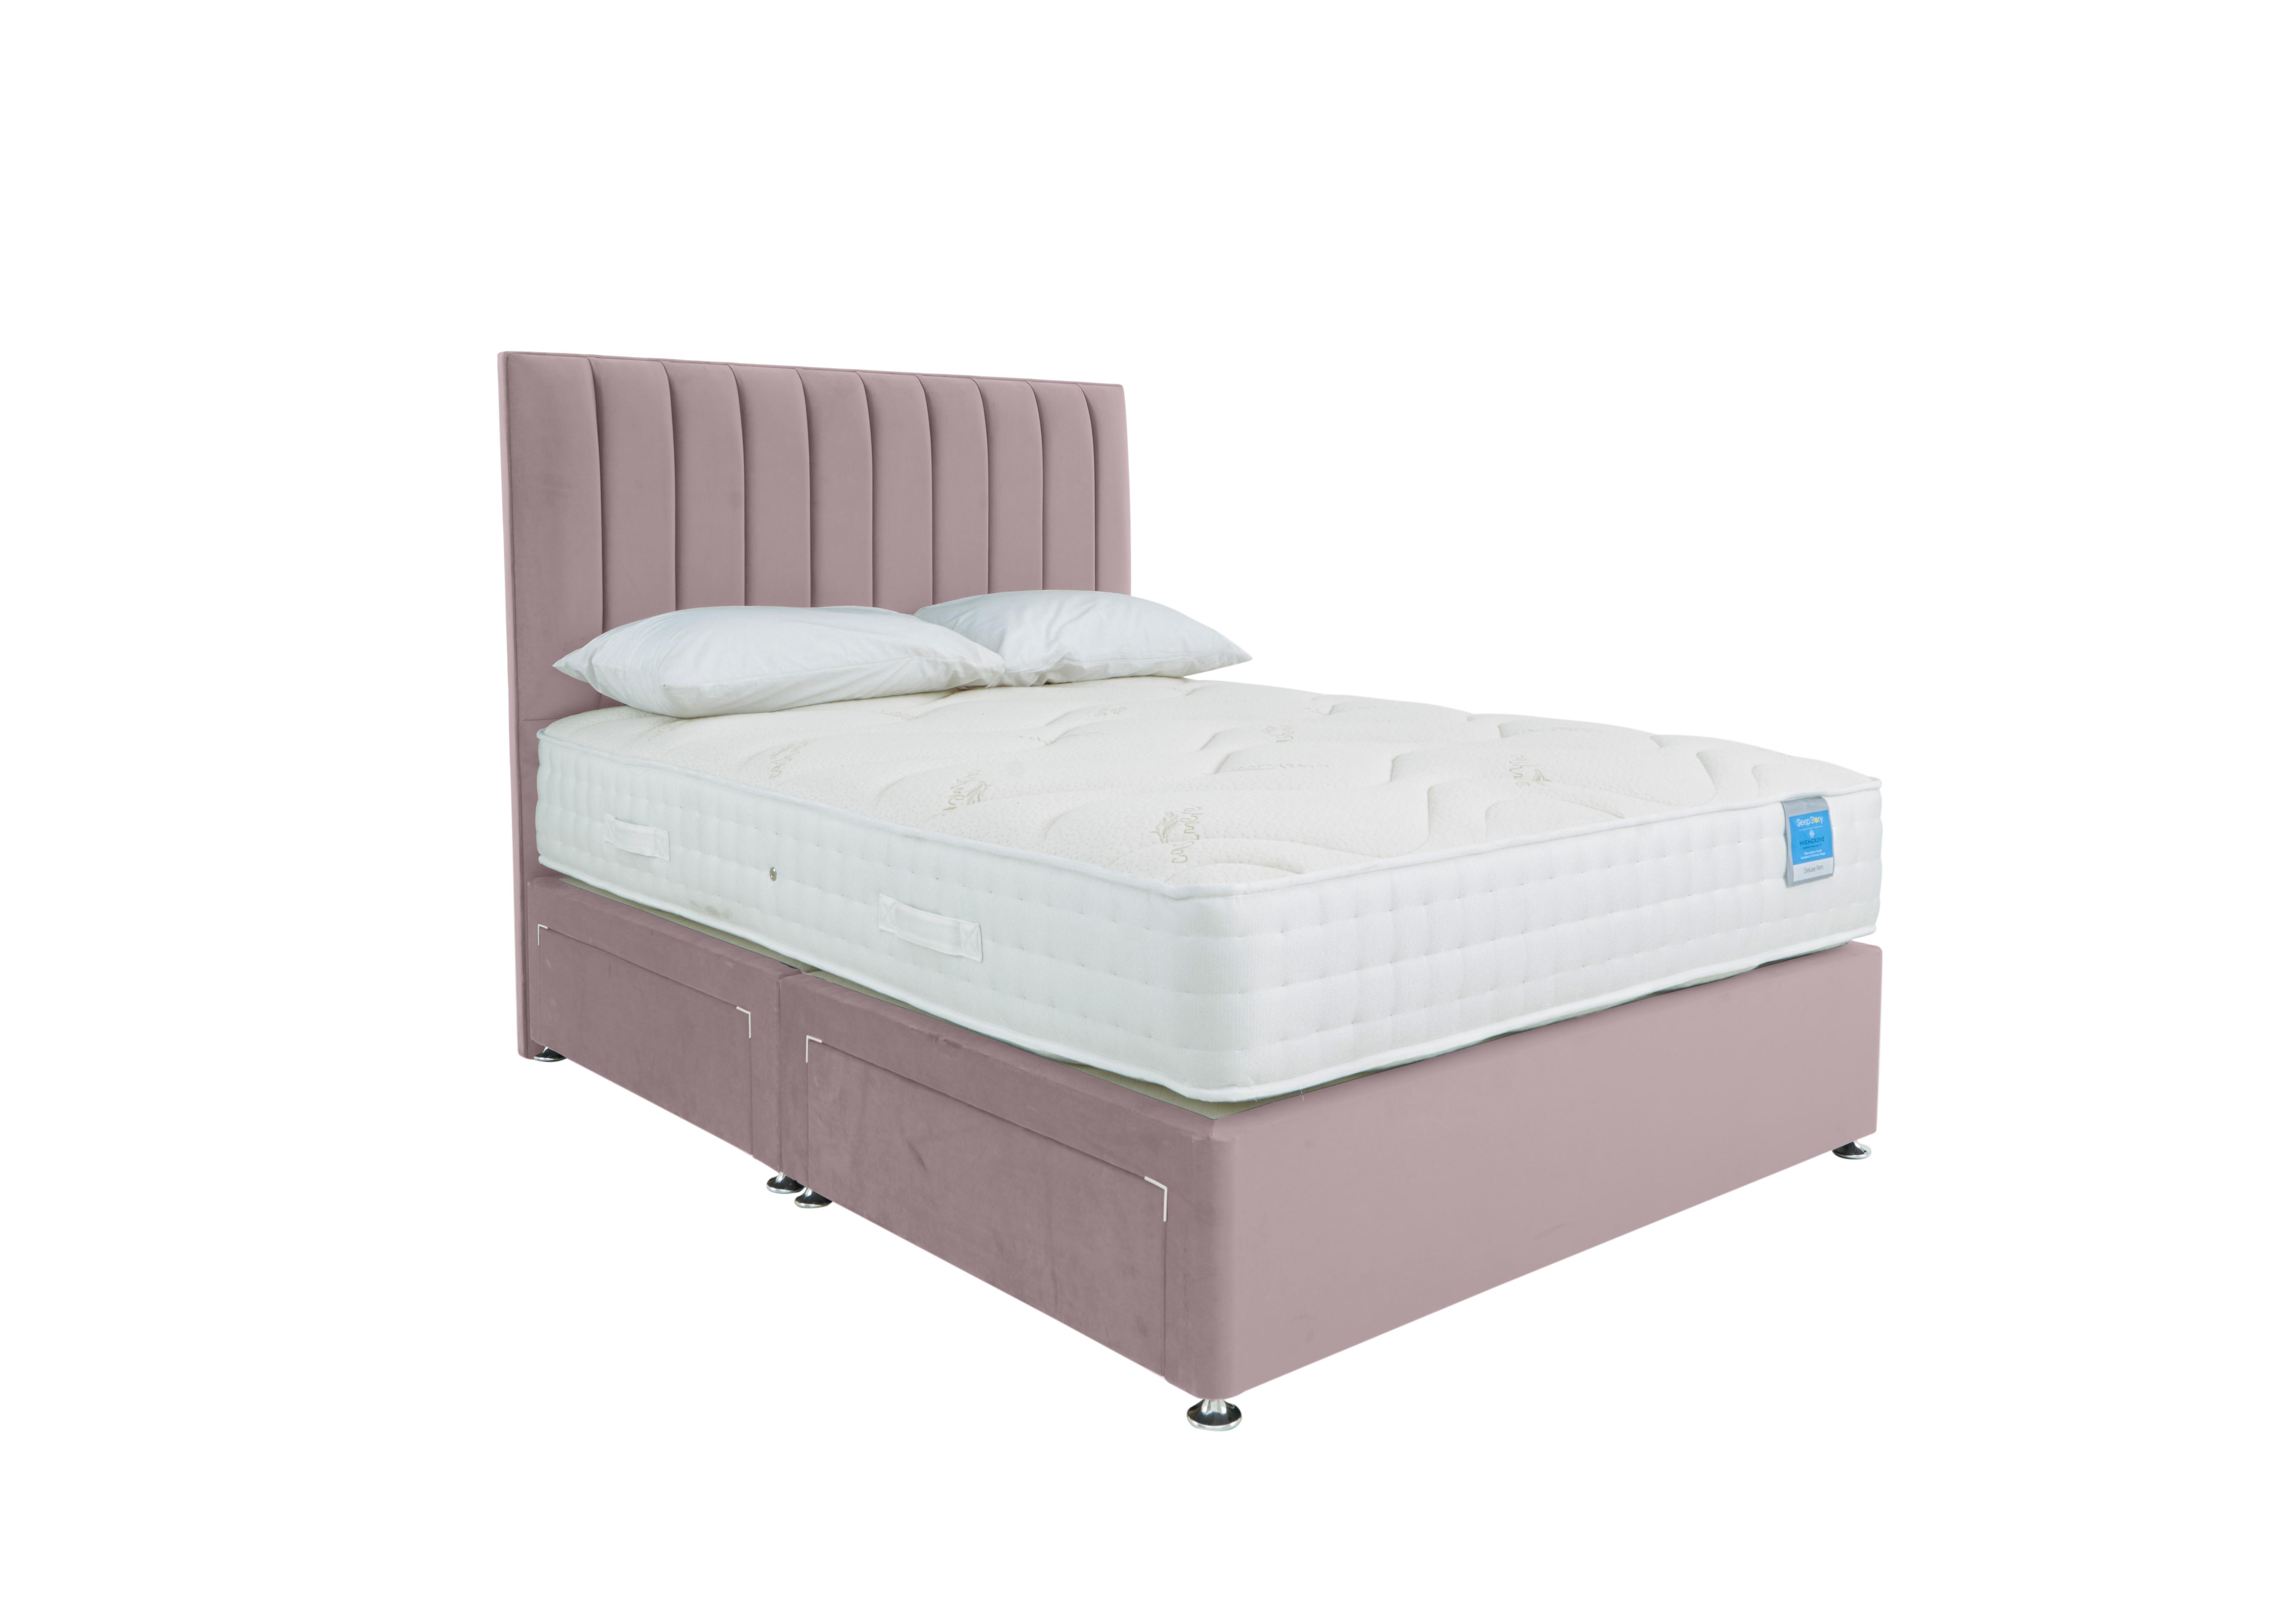 Deluxe Firm Divan Set in Plush Lilac on Furniture Village